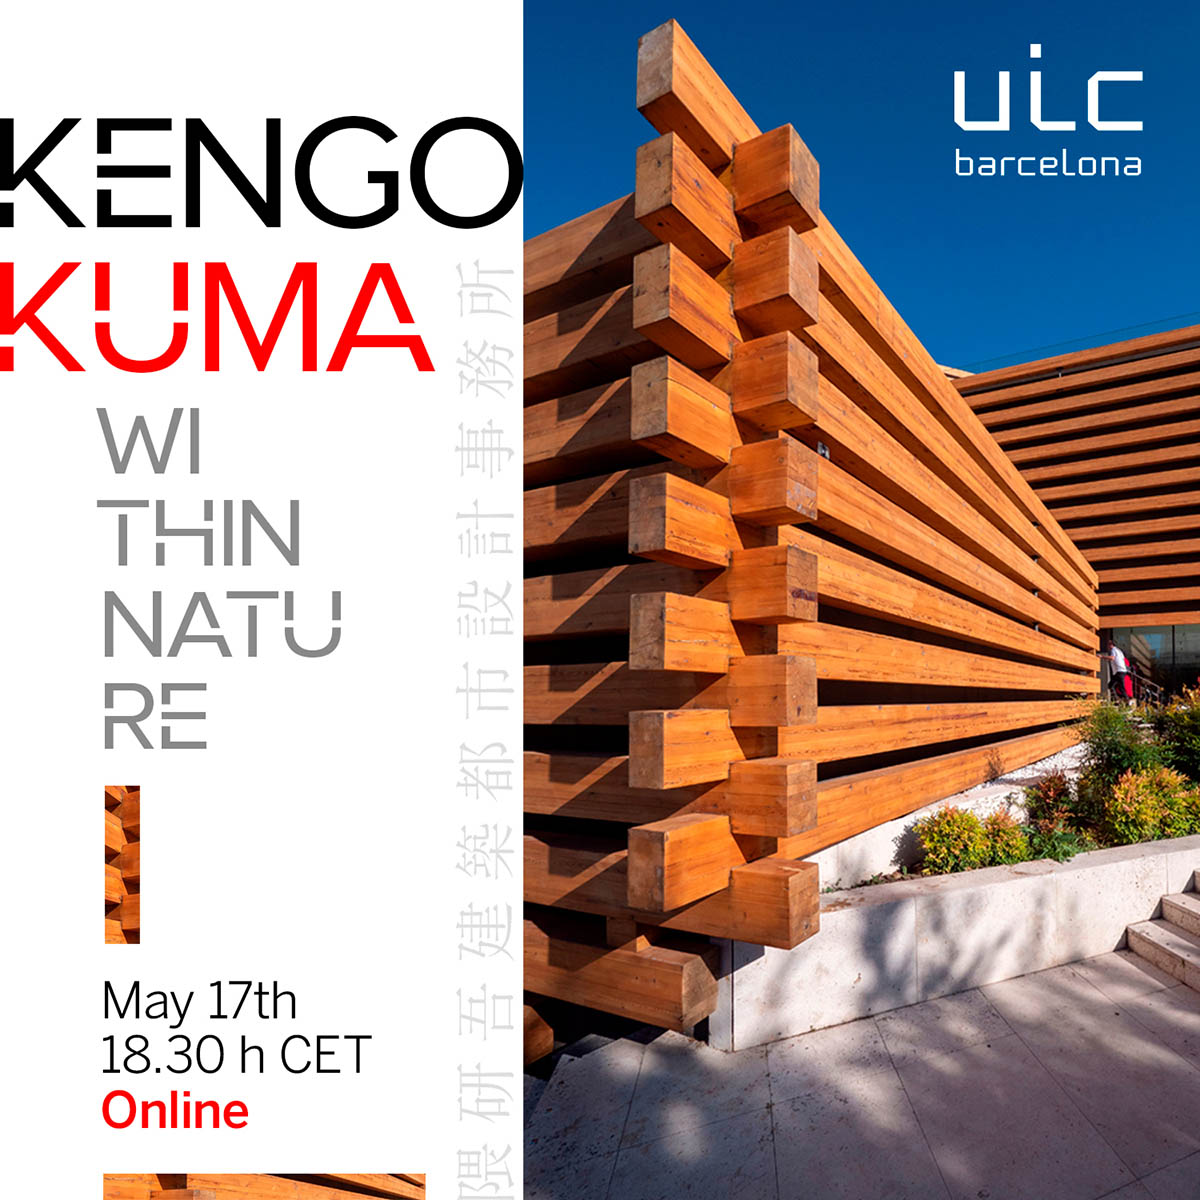 Renowned architect Kengo Kuma headlines UIC Barcelona's (@ArchitectureUIC) FOROS online conference on May 17th, 18:30h CET! Join us for a captivating exploration of Kuma's visionary work, blending natural materials and sustainability. Register here: worldarchitecture.org/architecture-n…